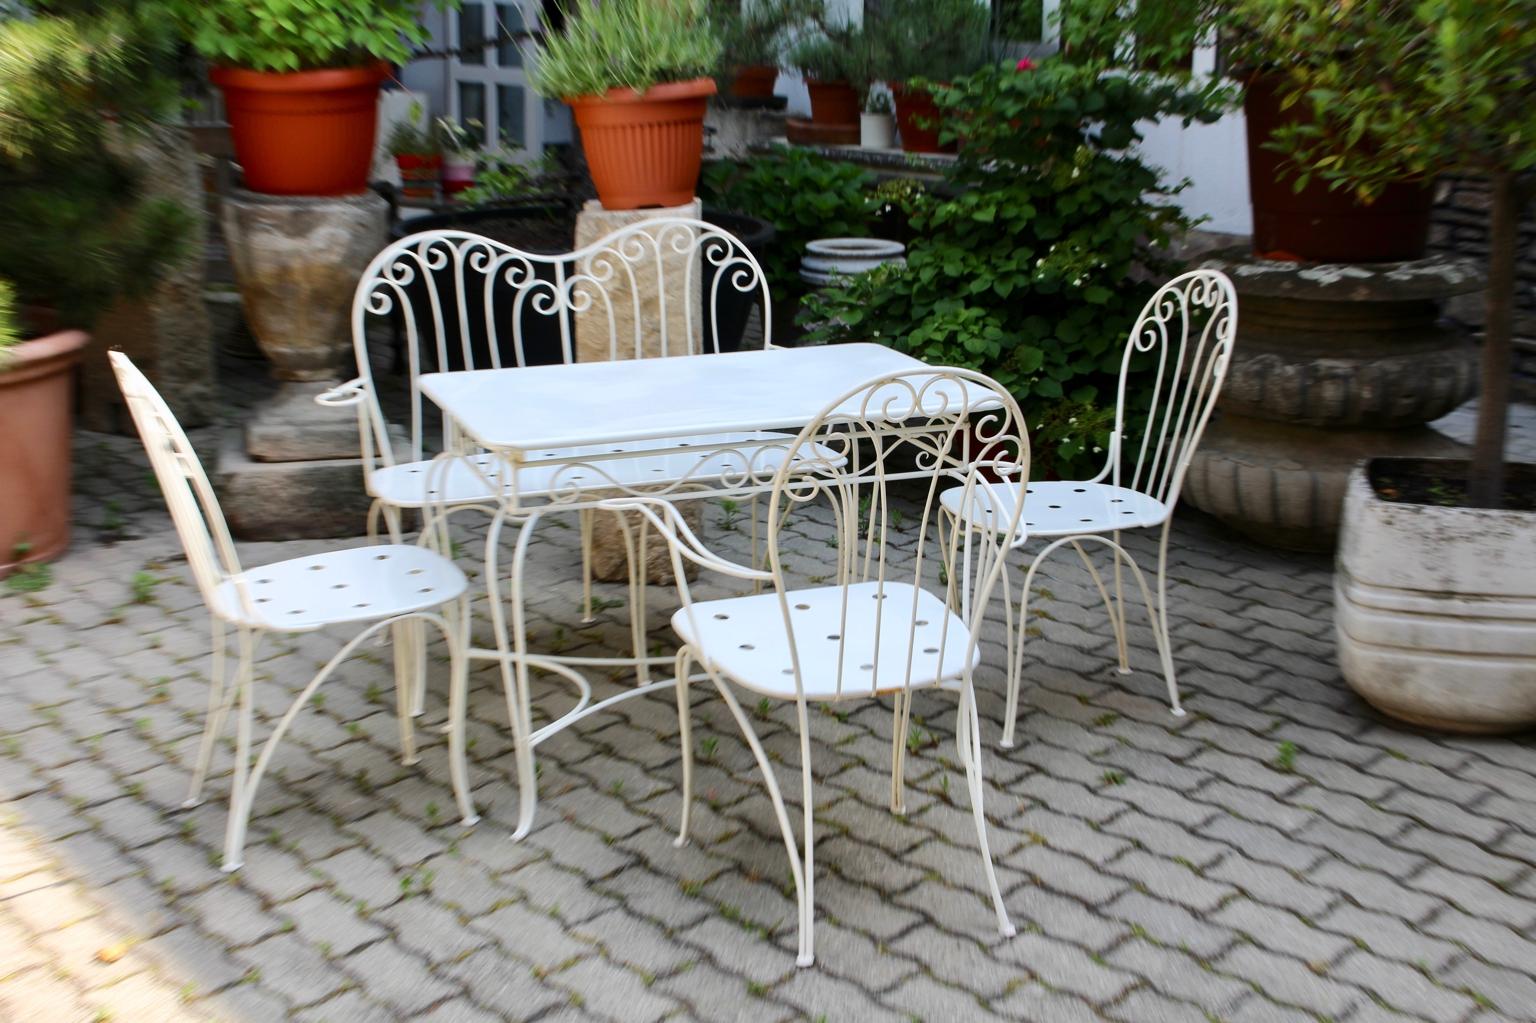 Mid Century Modern white metal vintage seating group or garden furniture, which were designed and executed by Stanislaus Karasek and Co, 1950s, Vienna, Austria.
The seating group is usable for indoor and outdoor.
This charming garden or patio